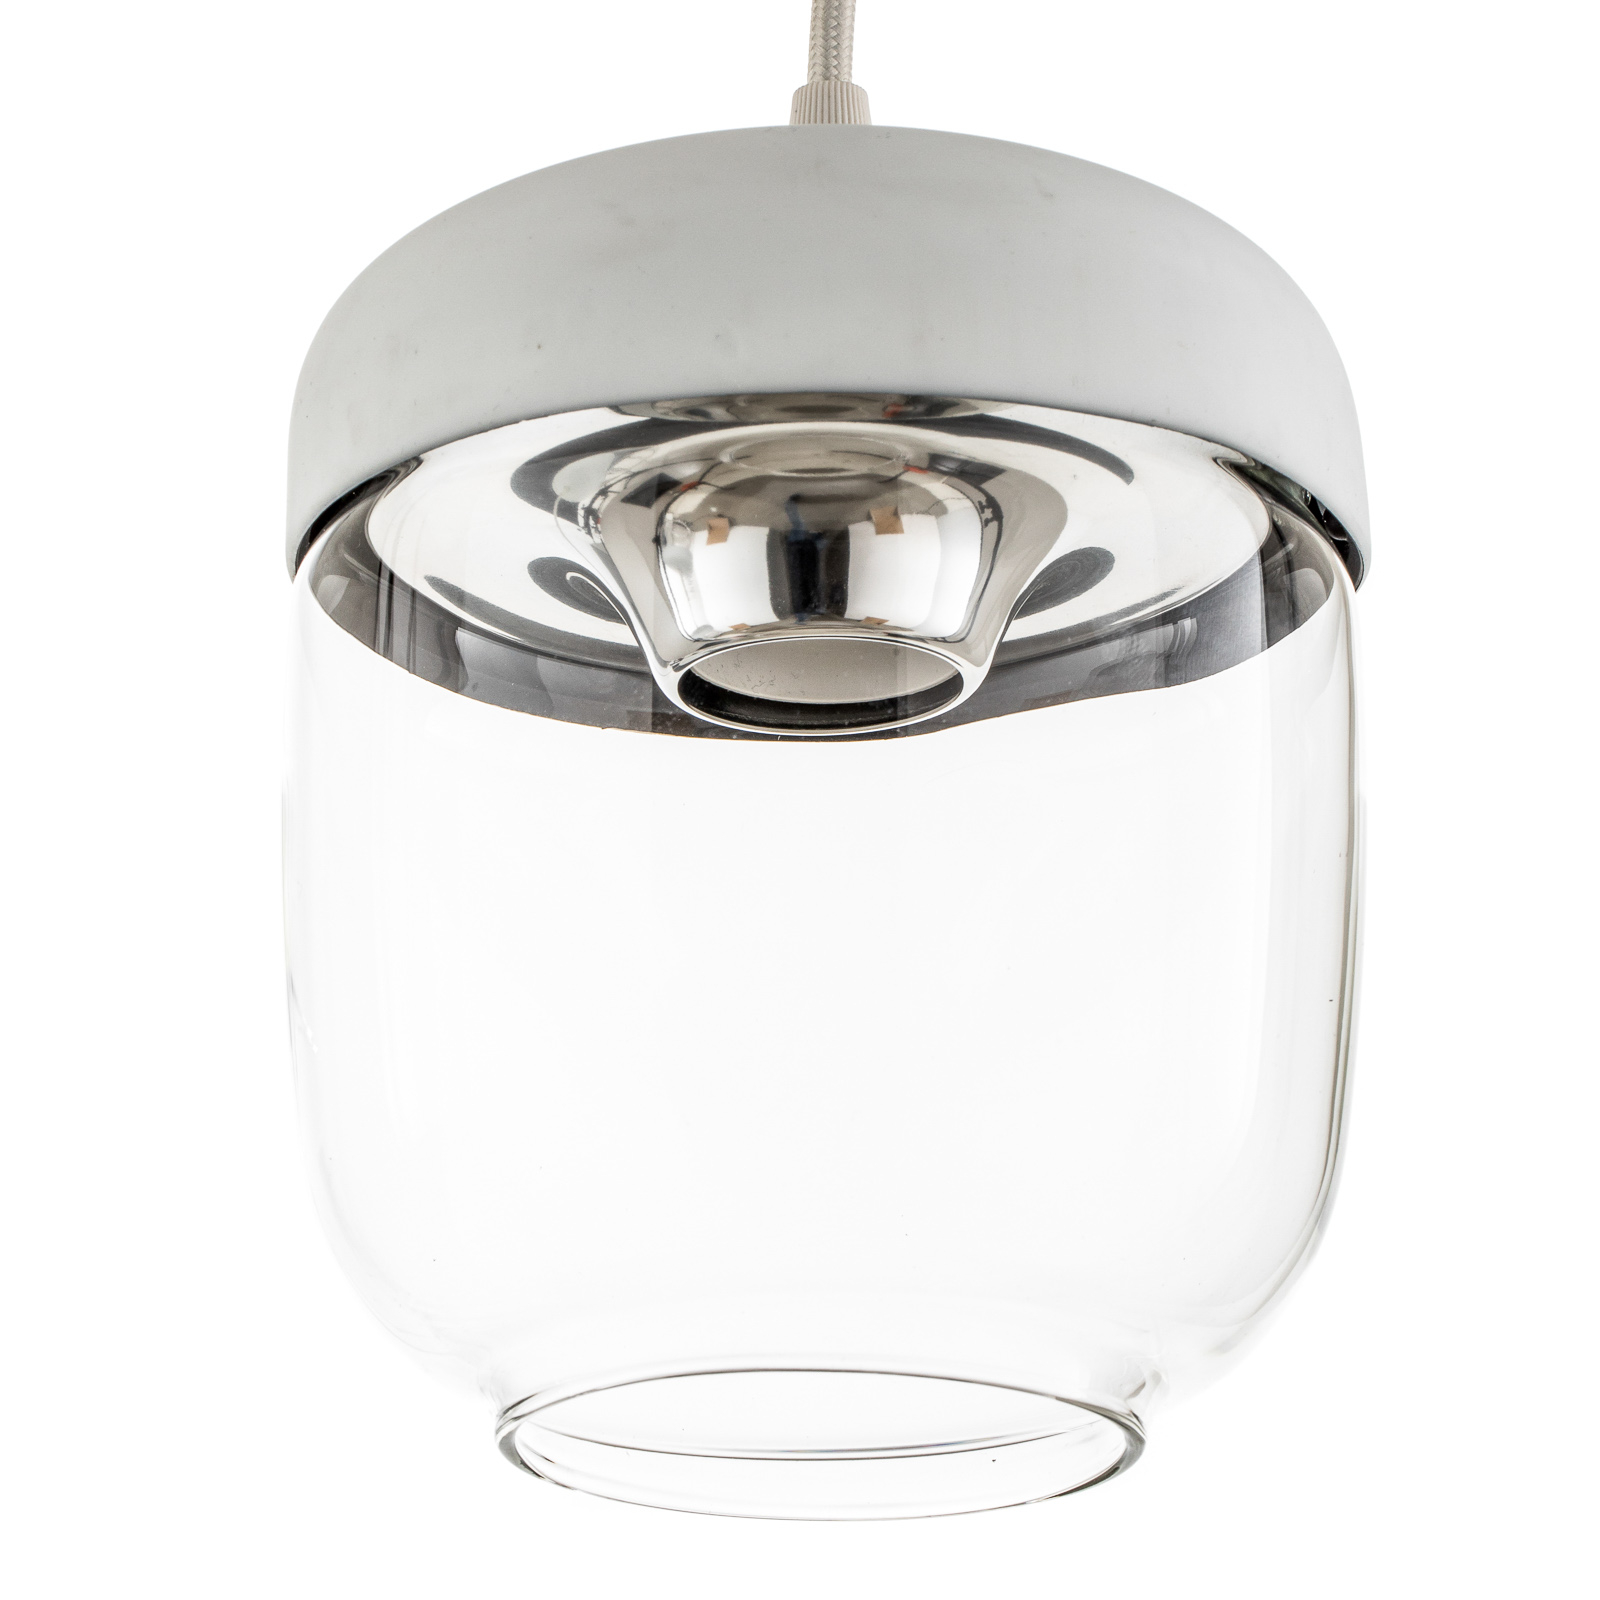 UMAGE Acorn hanglamp wit/staal, 2-lamps